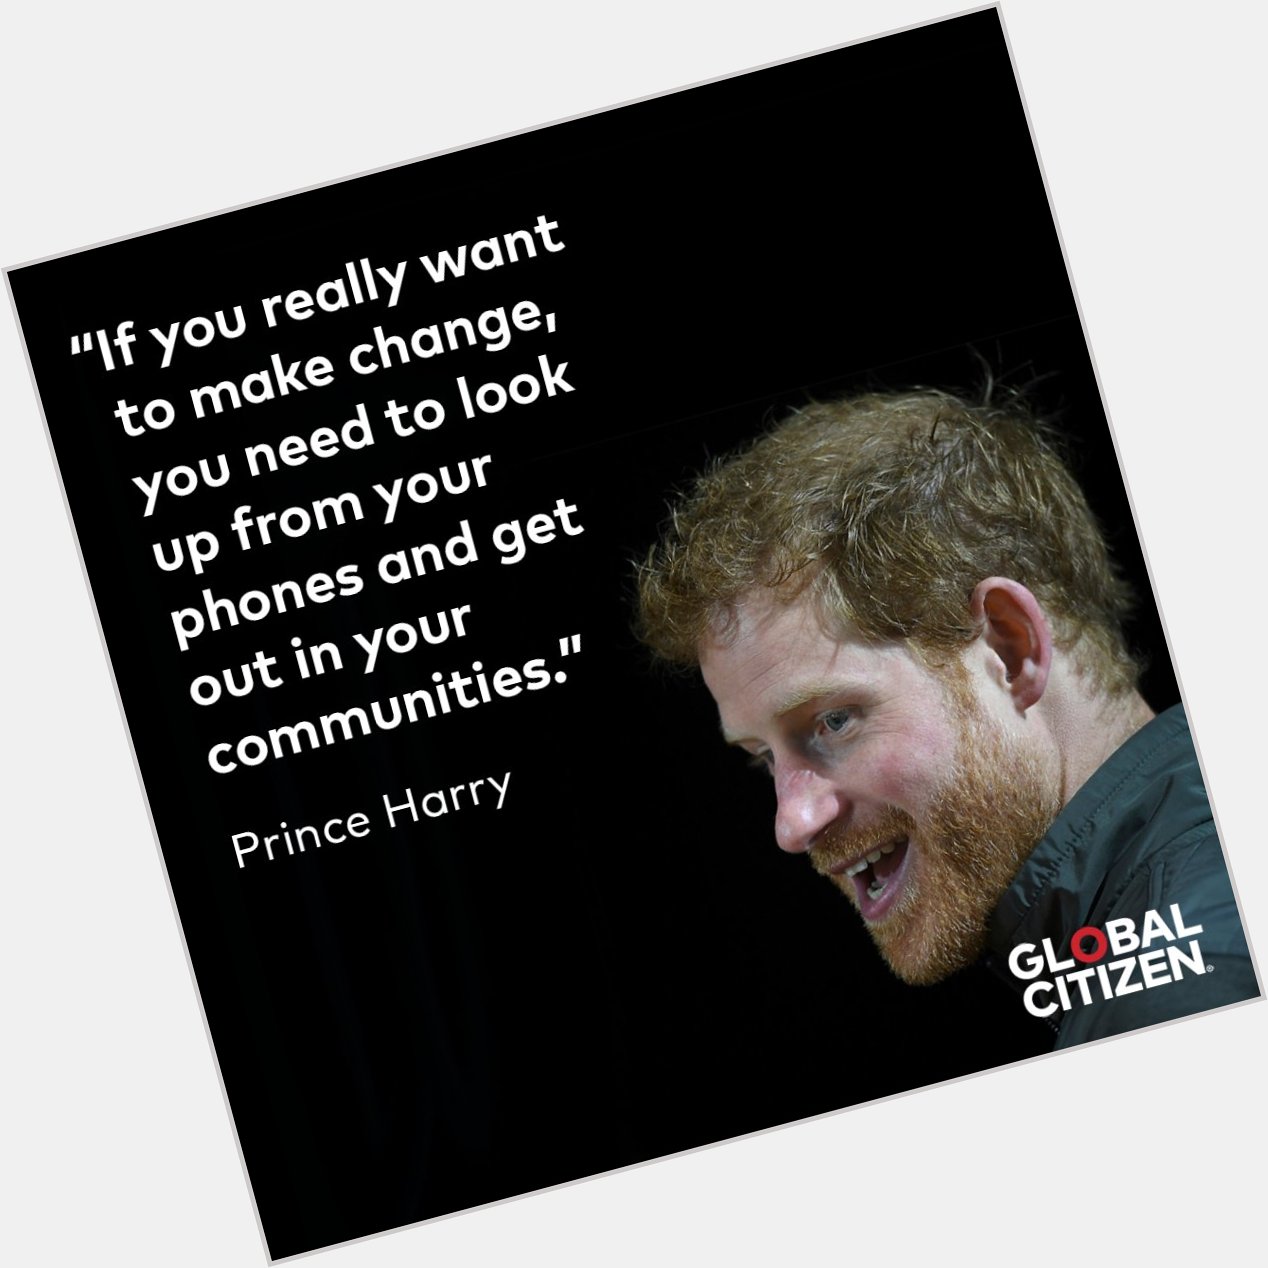 Be an activist like the Duke of Sussex who turns 34 today! Happy birthday, Prince Harry 